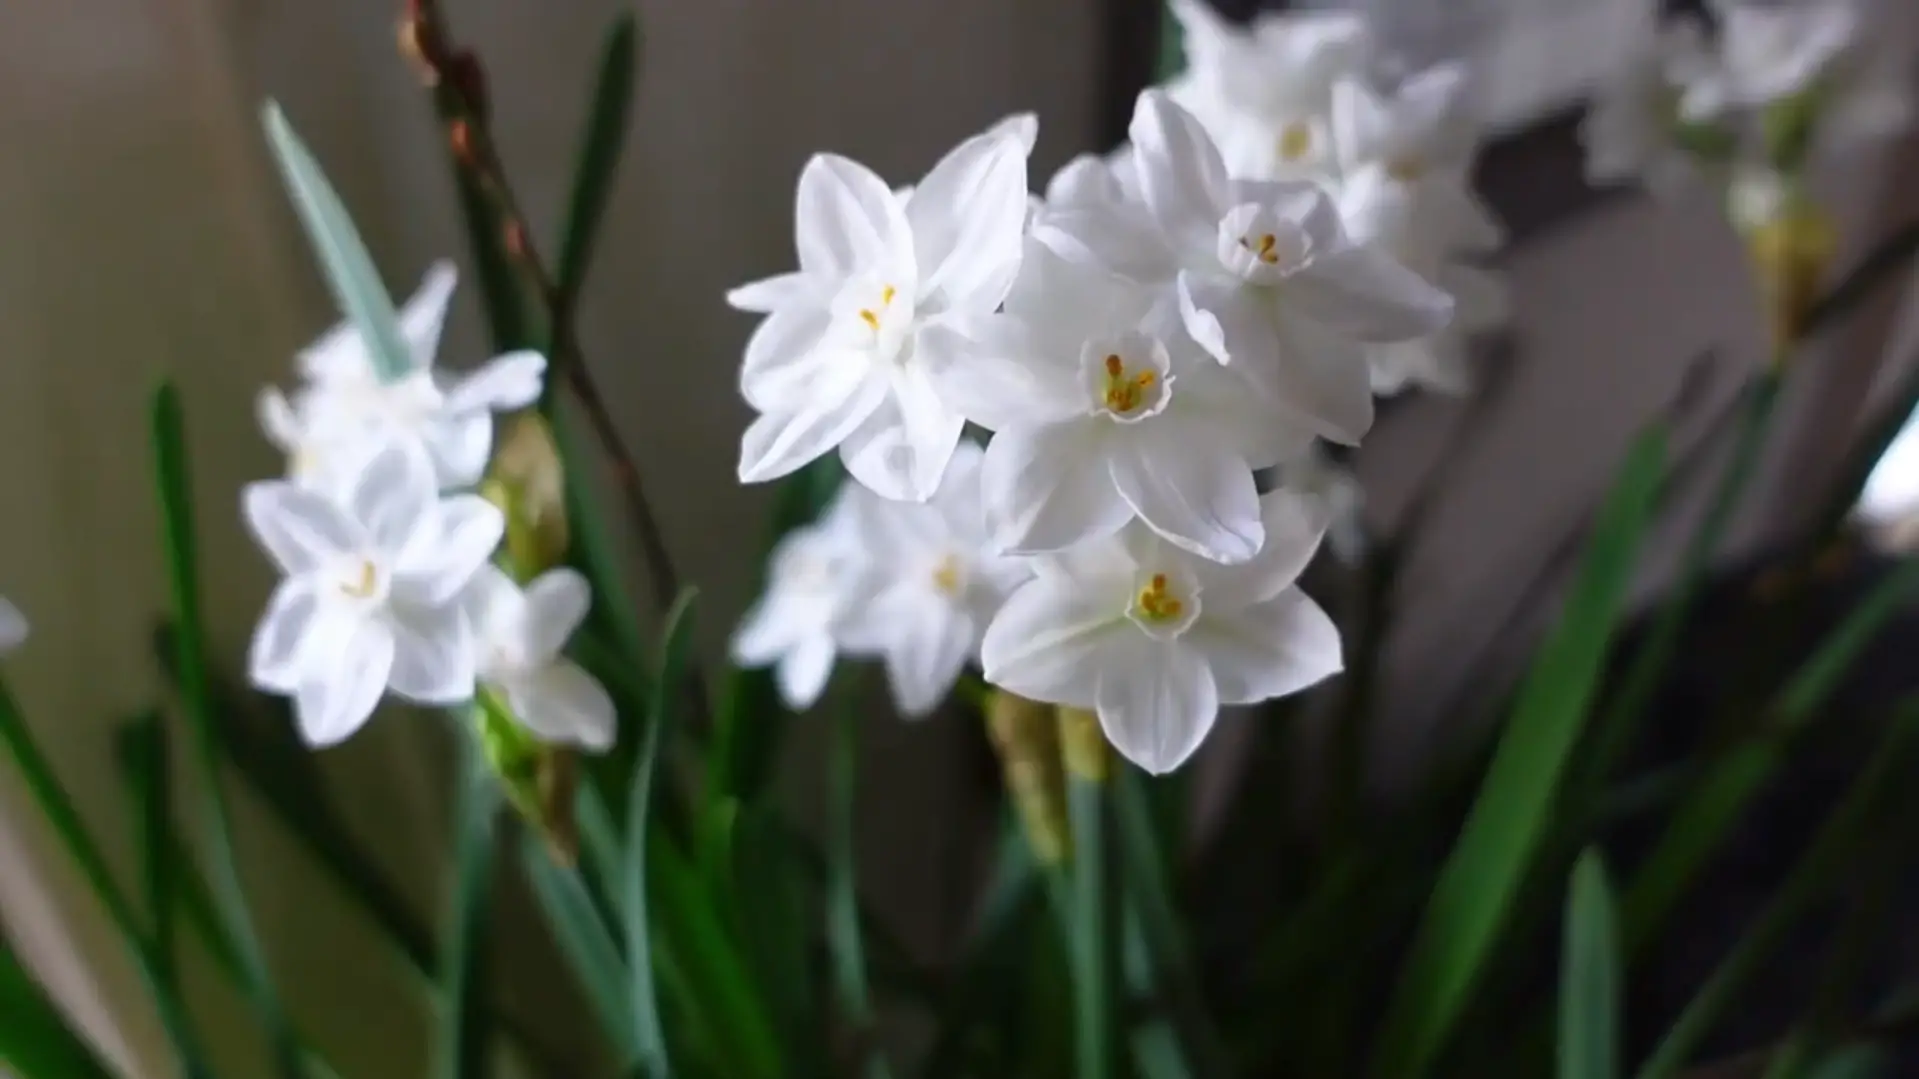 Popularity of Paperwhites as outdoor decoration